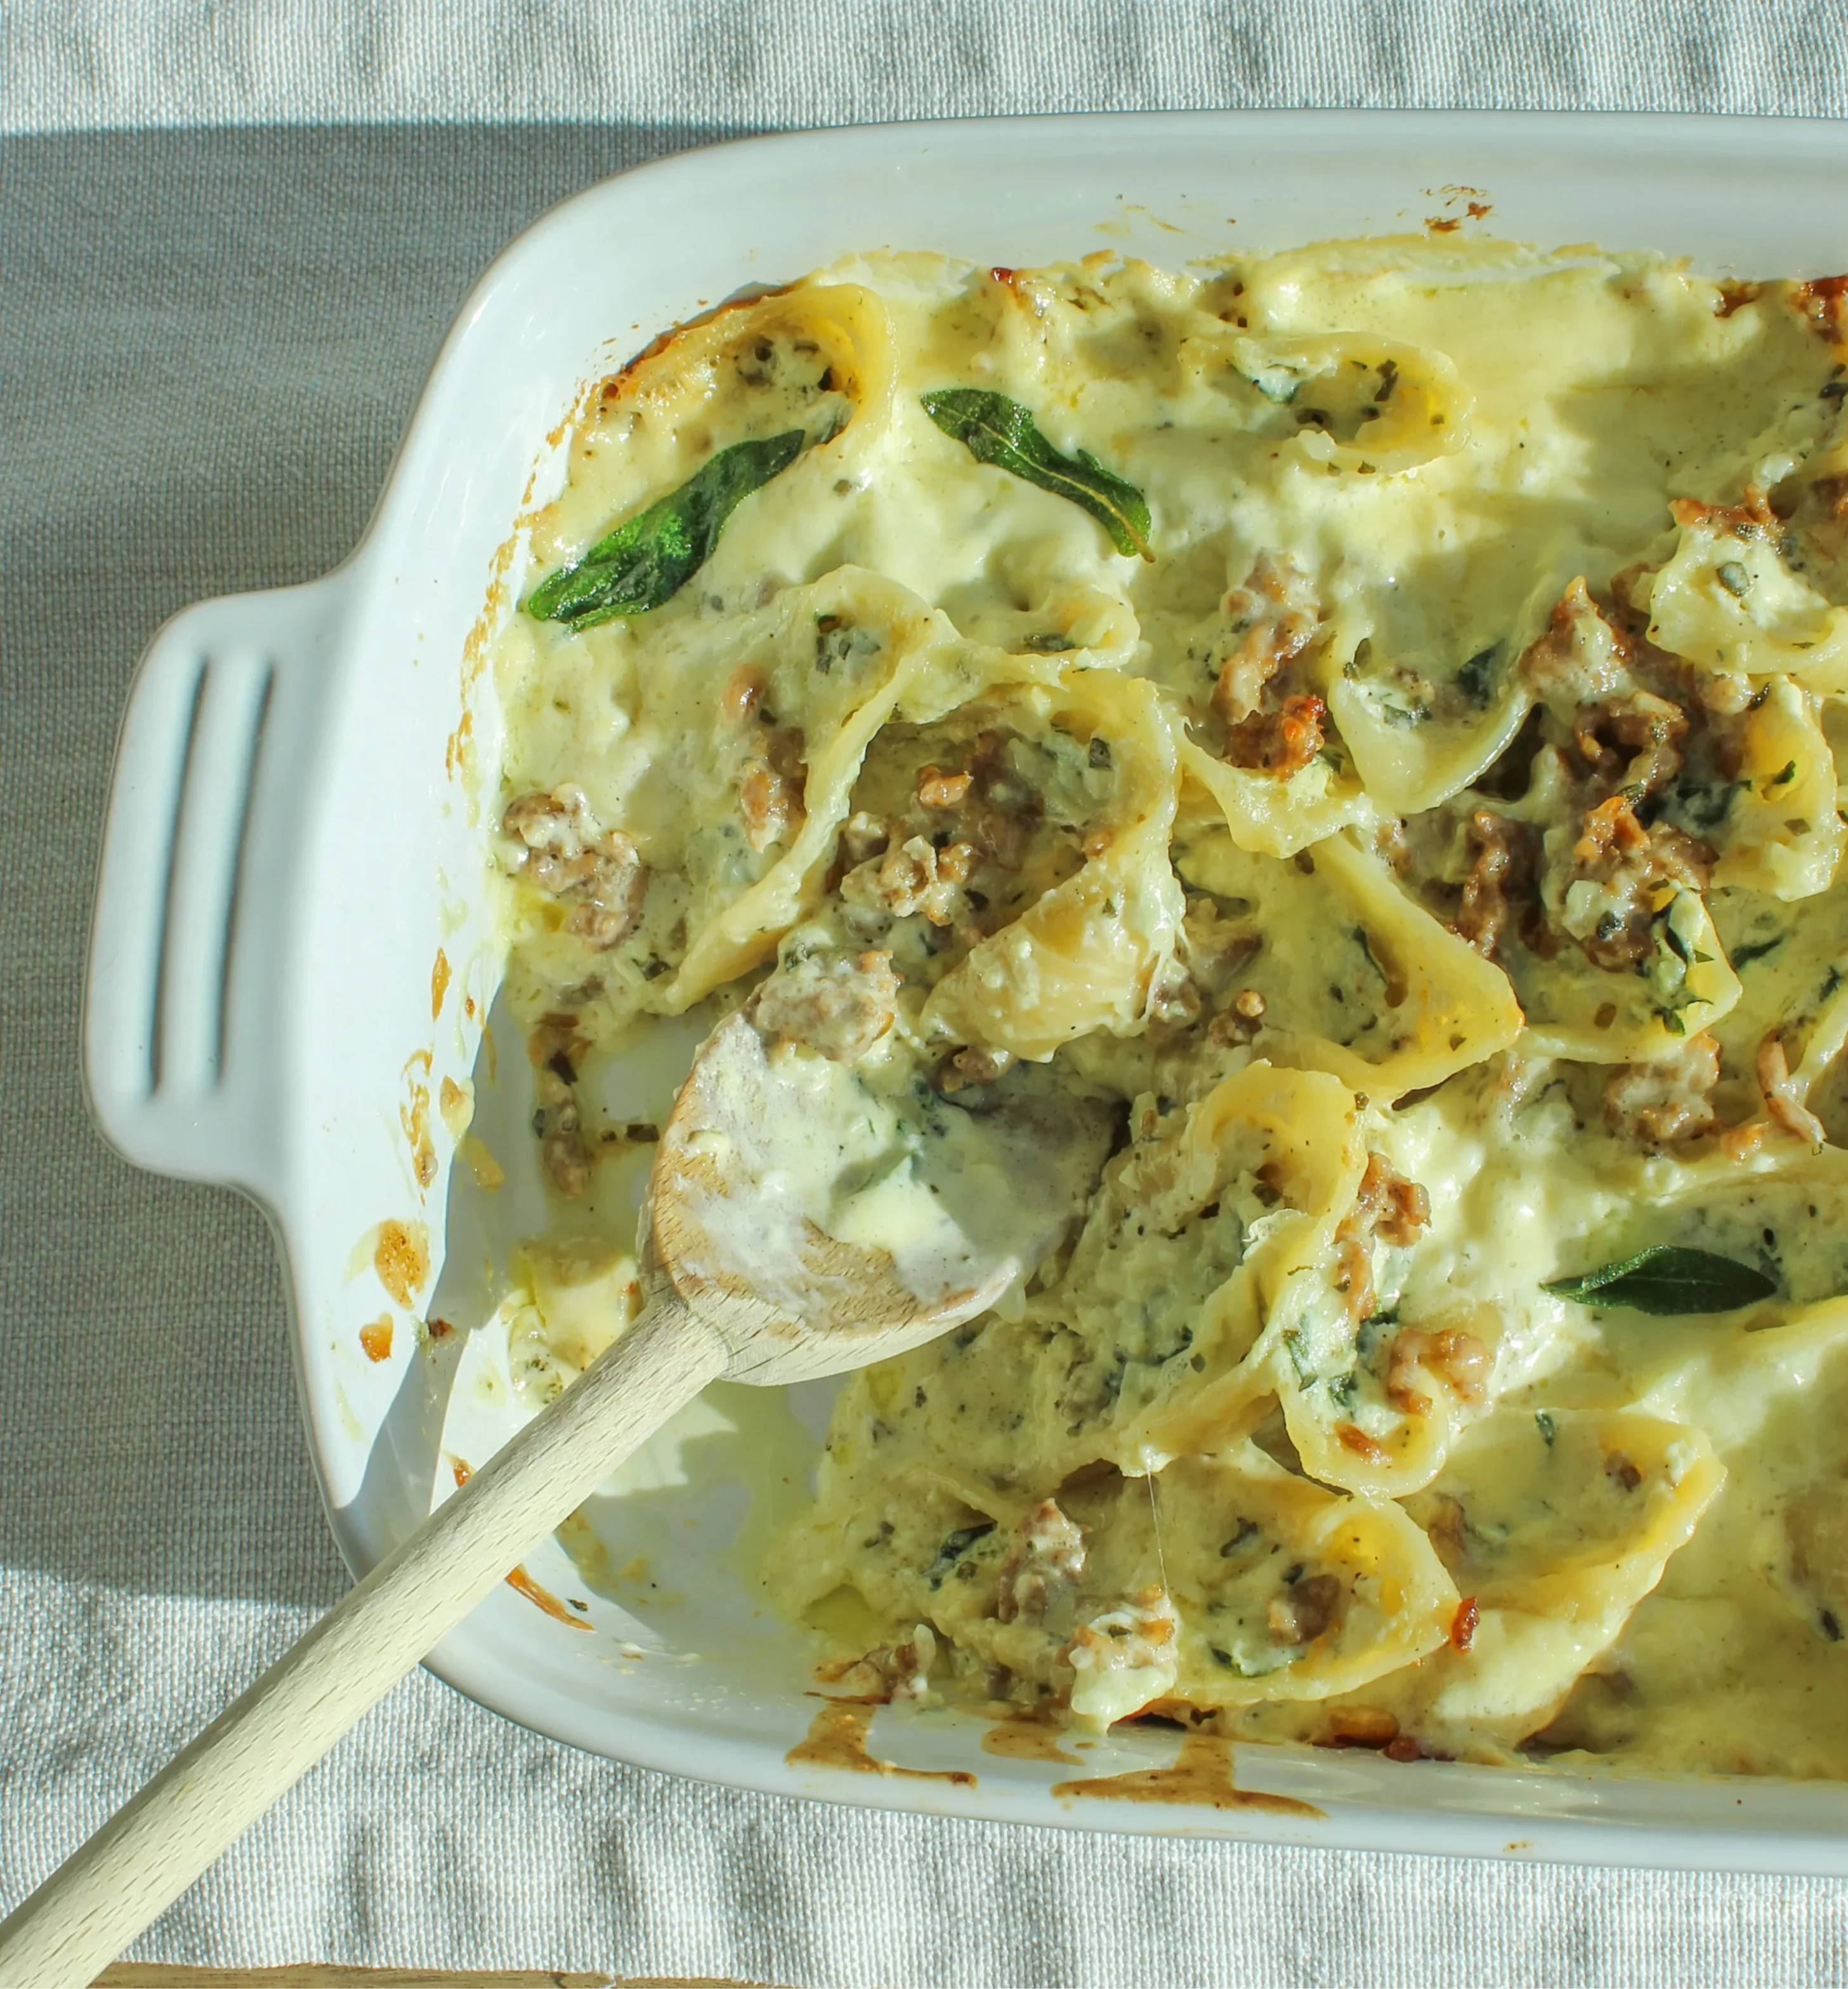 Picture for Sage Sausage Stuffed Shells